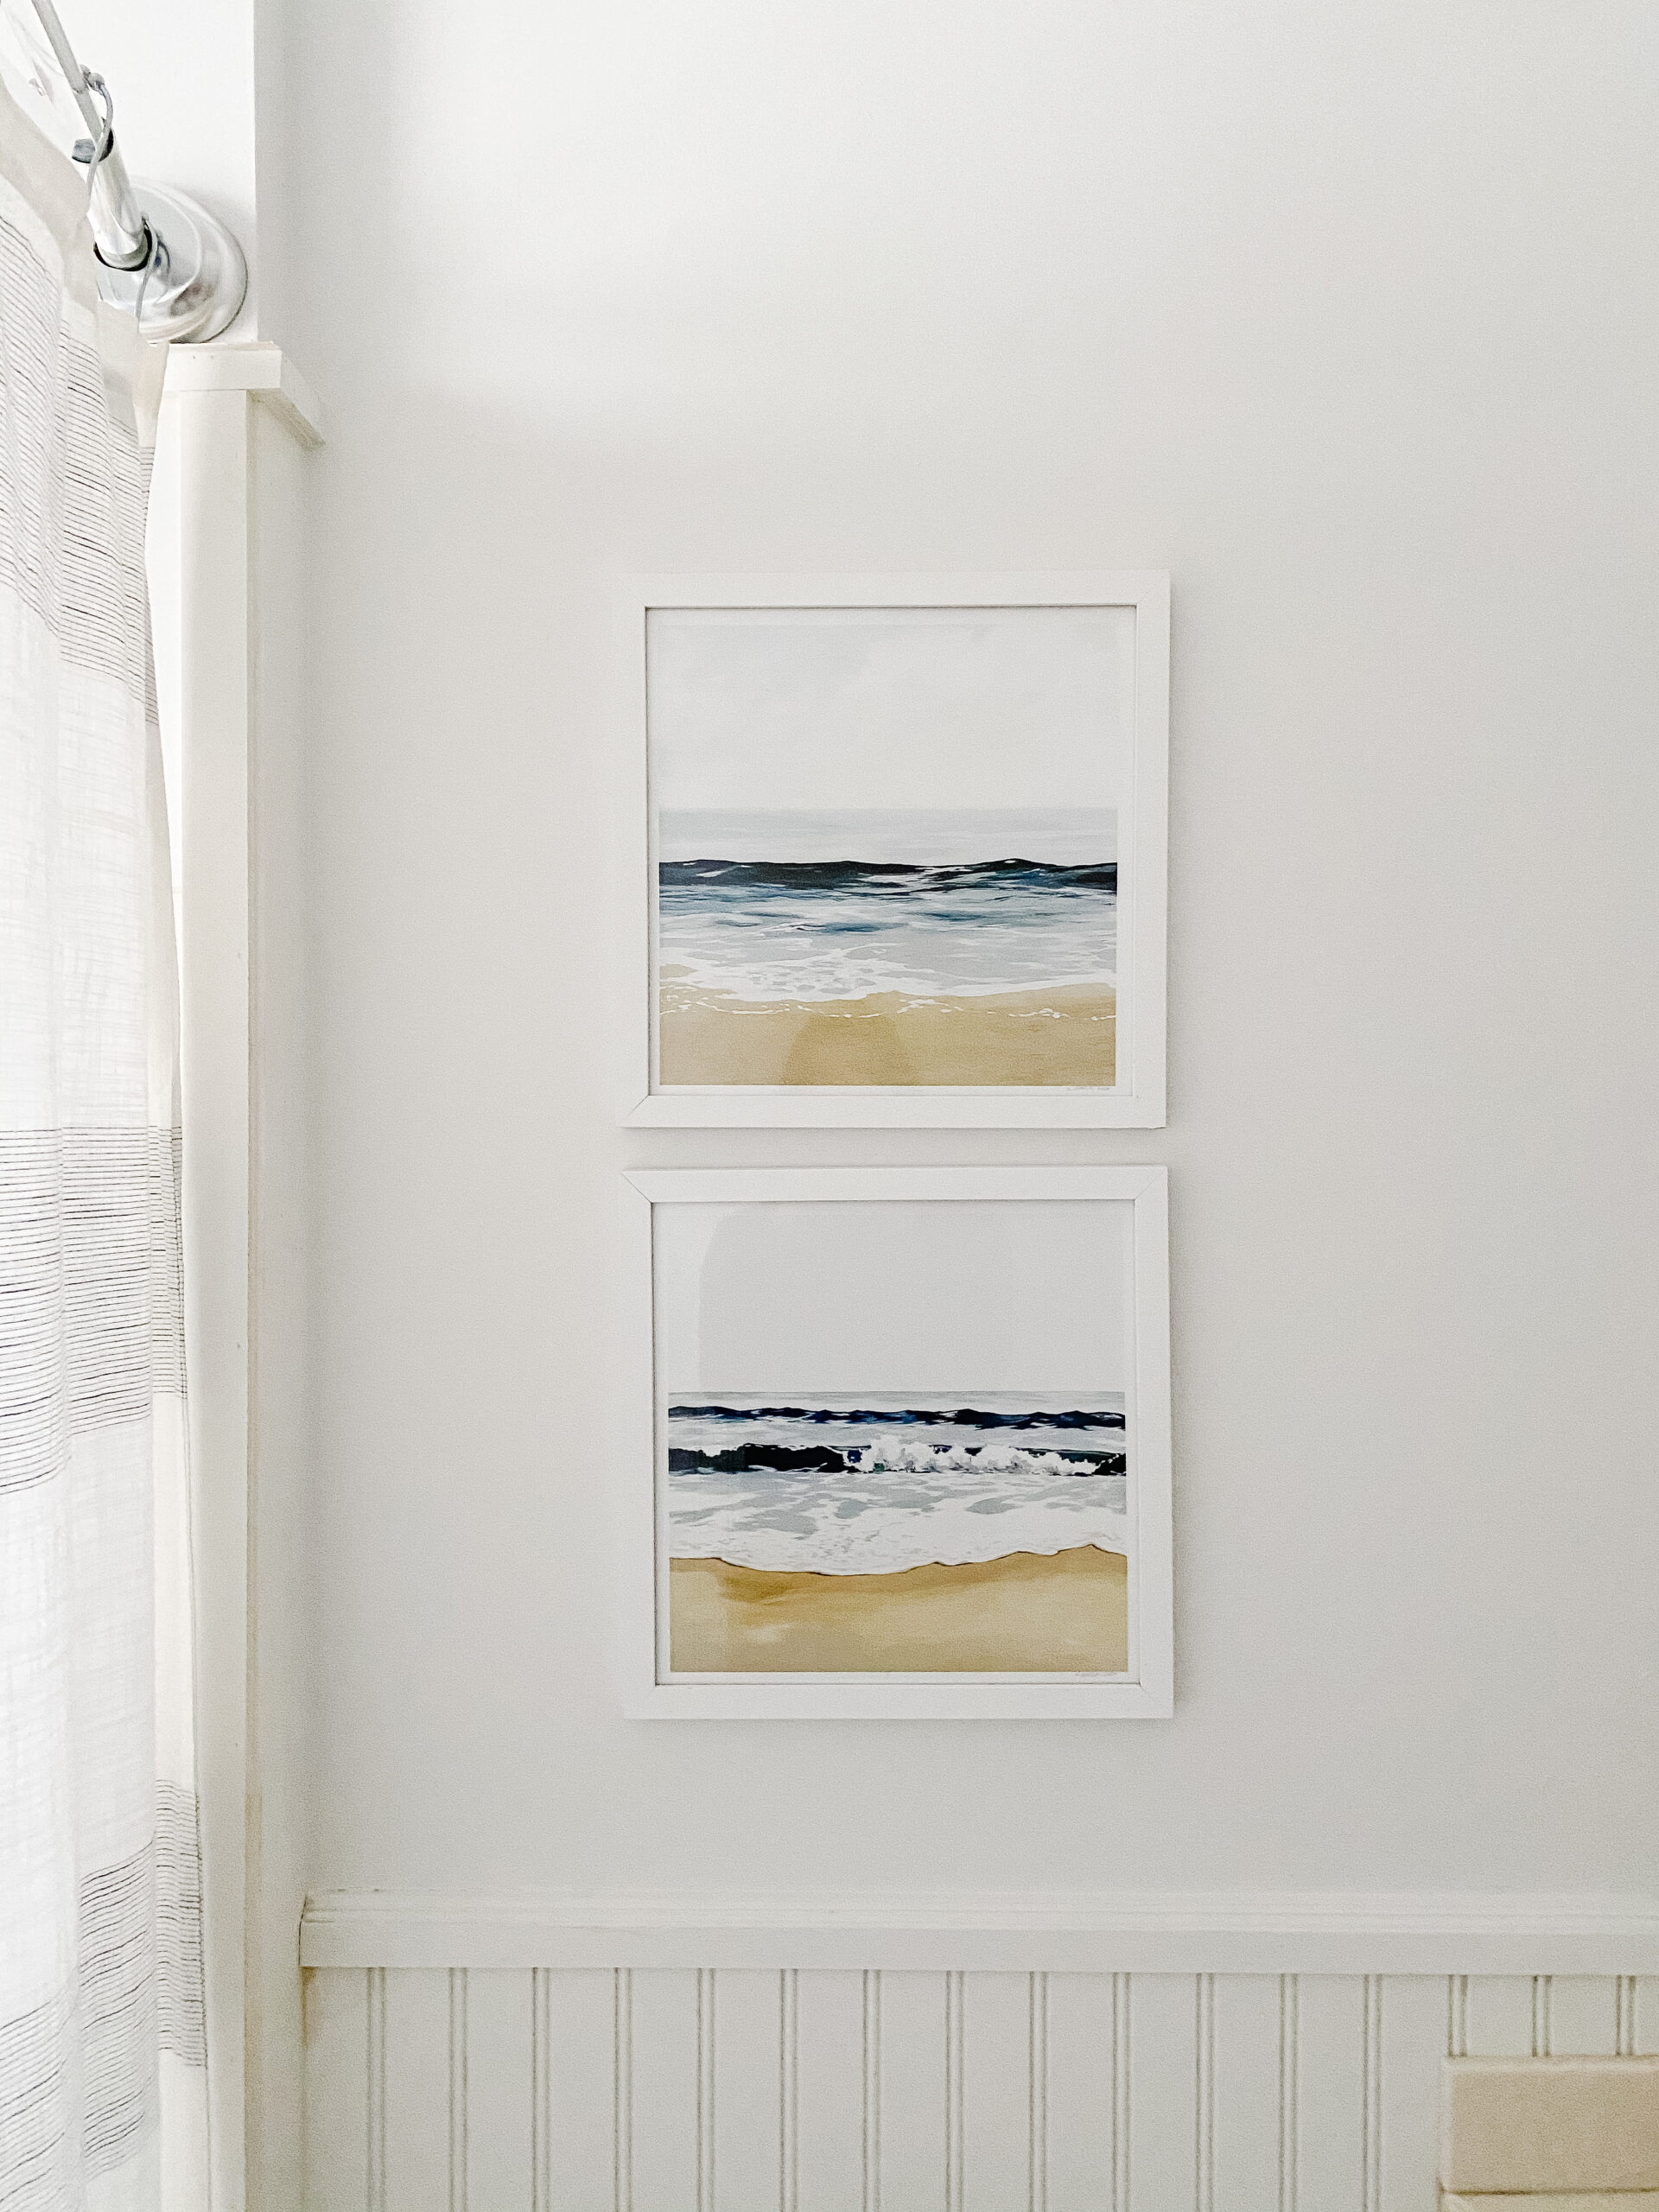 Connecticut life and style blogger Lauren McBride shares the coastal artwork in her modern coastal inspired home.